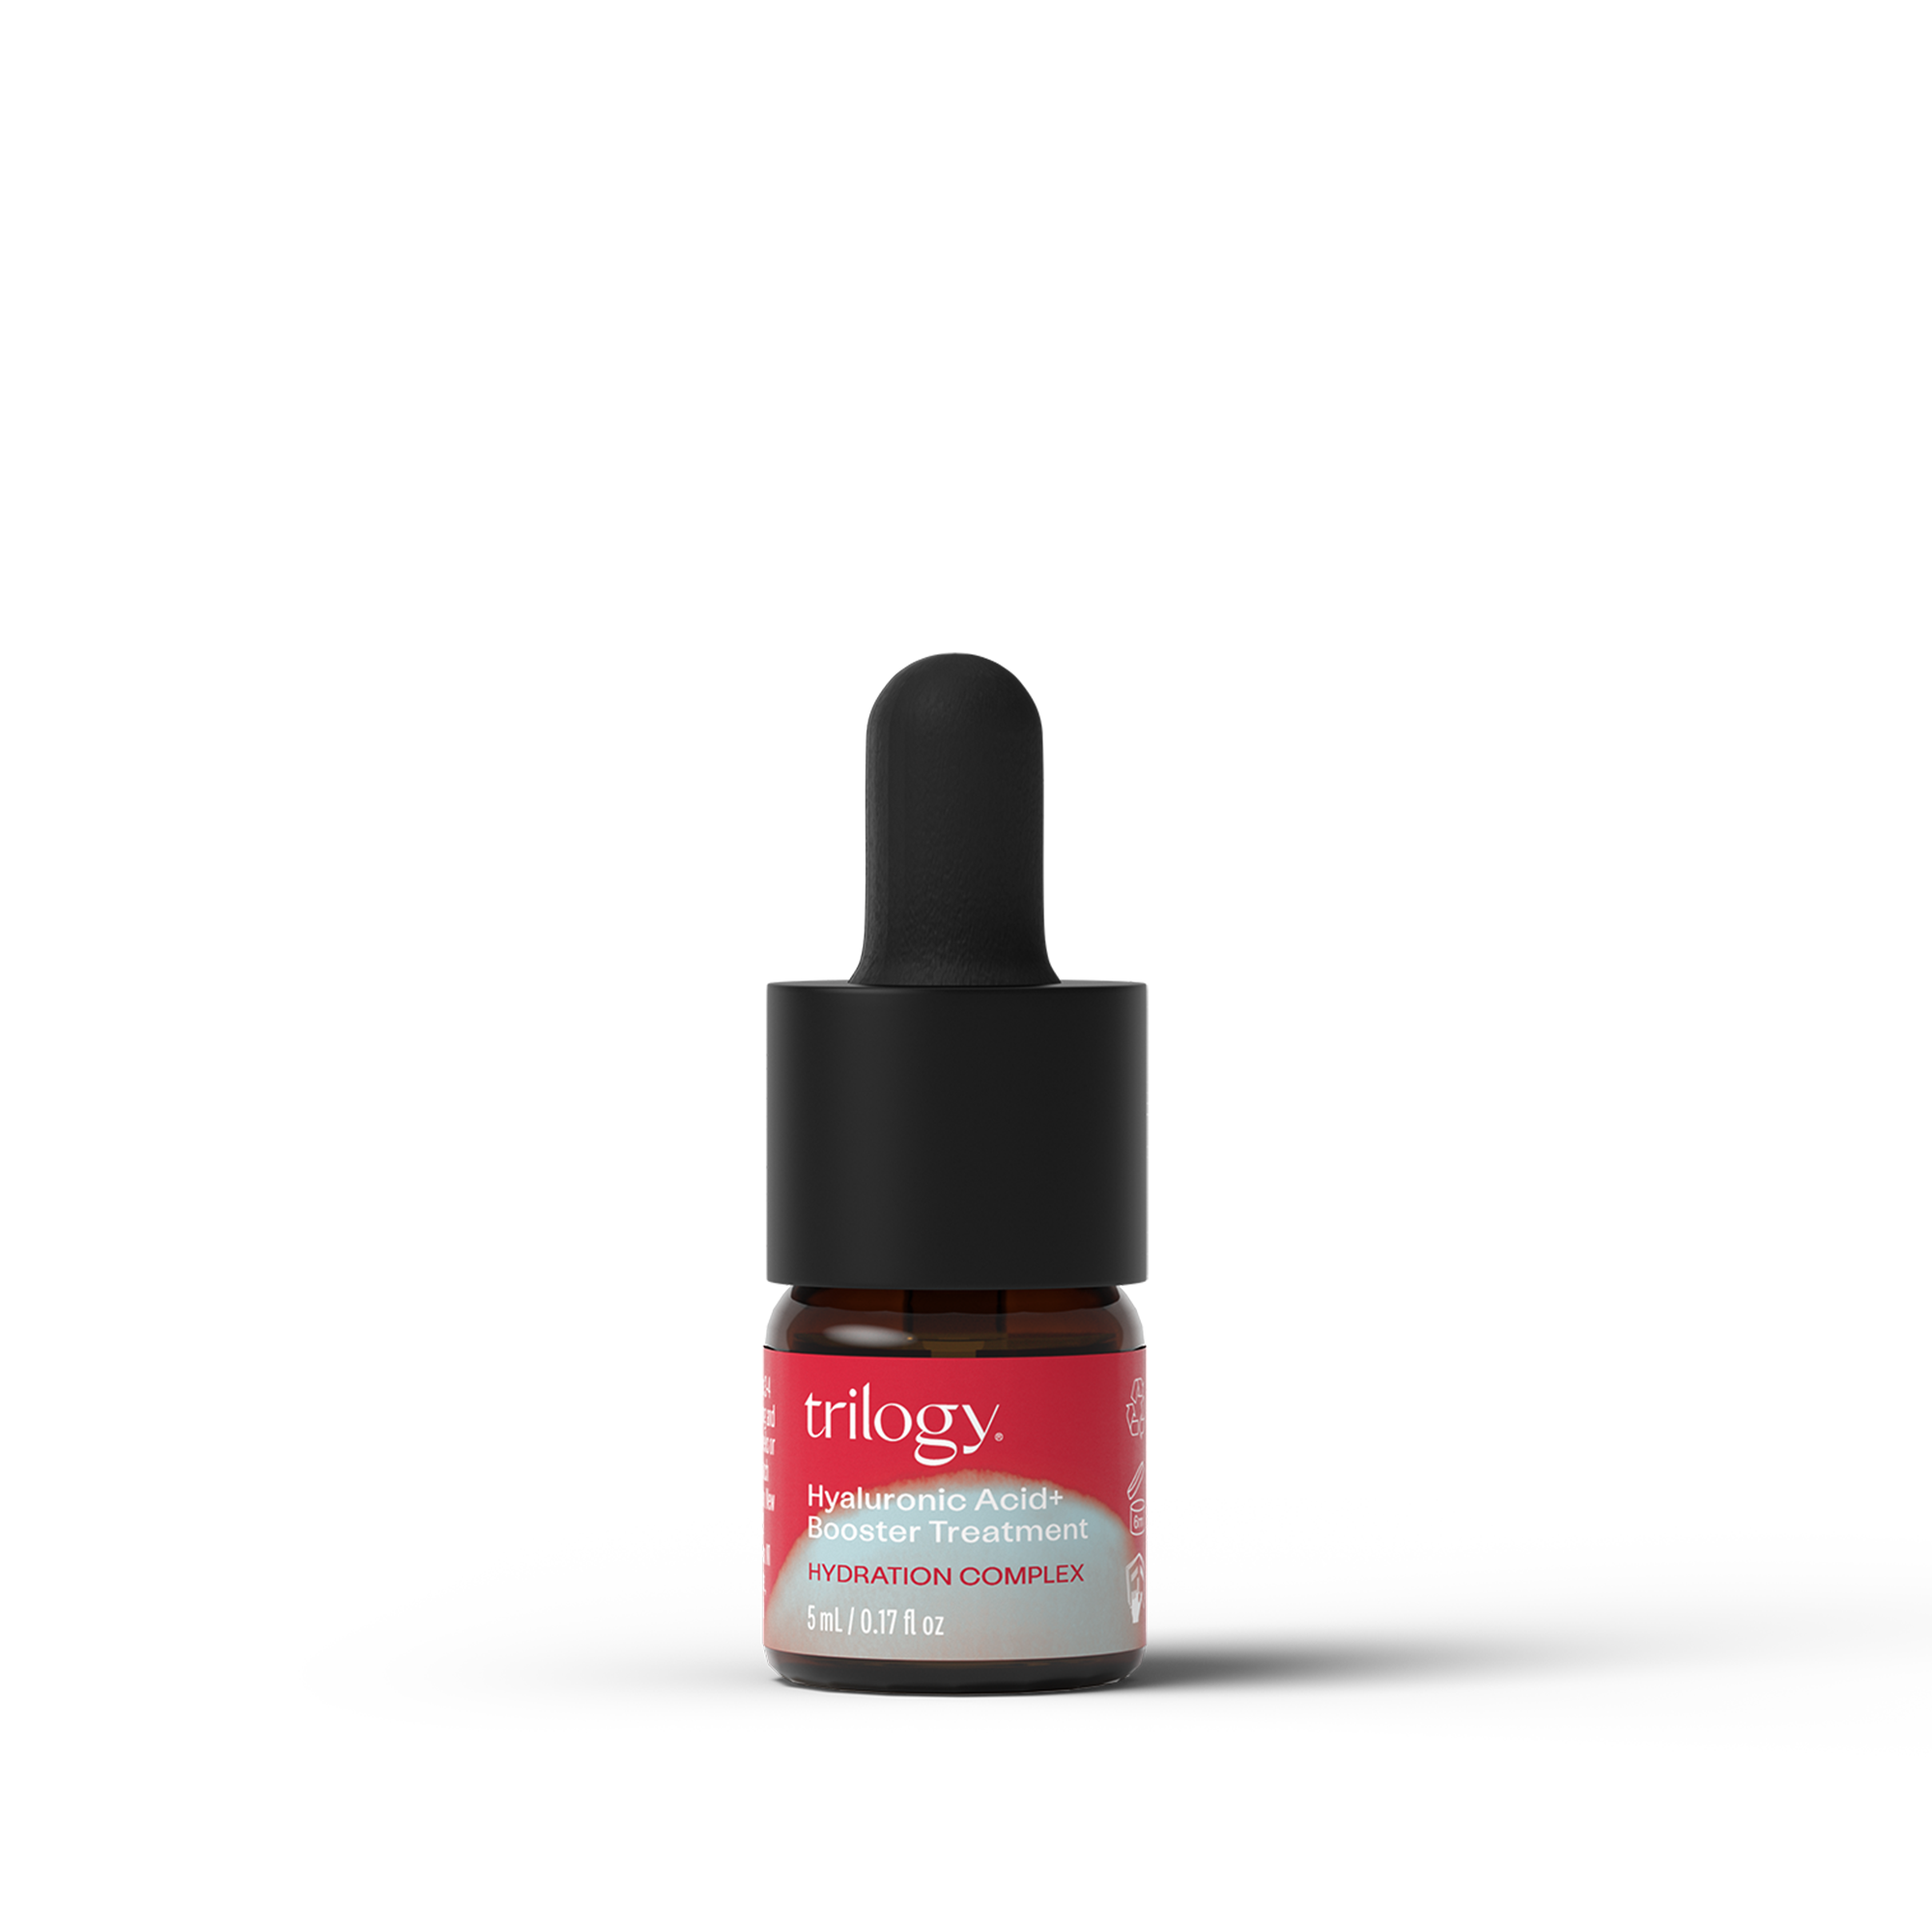 Hyaluronic Acid+ Booster Treatment, 5mL